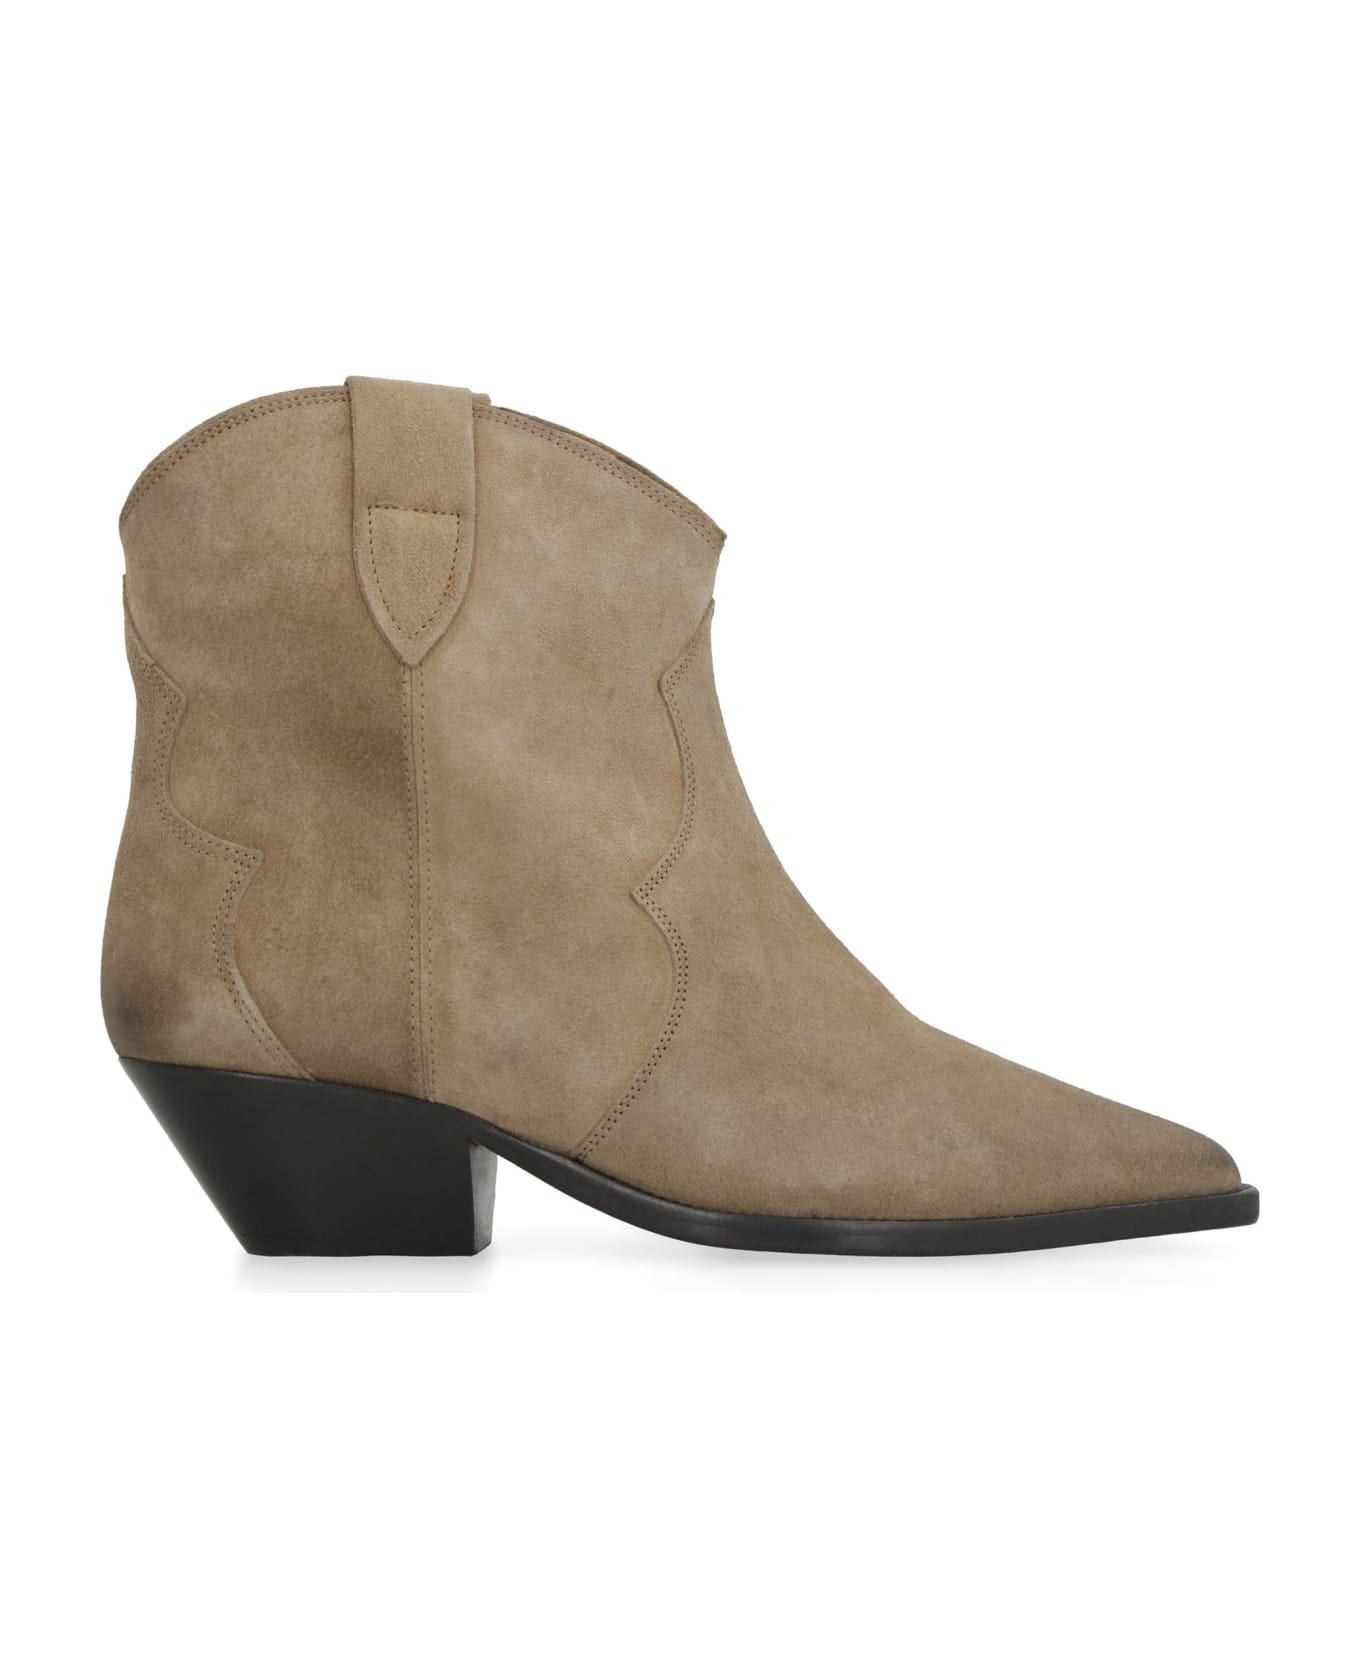 Isabel Marant Dewina Suede Ankle Boots - Dove Grey